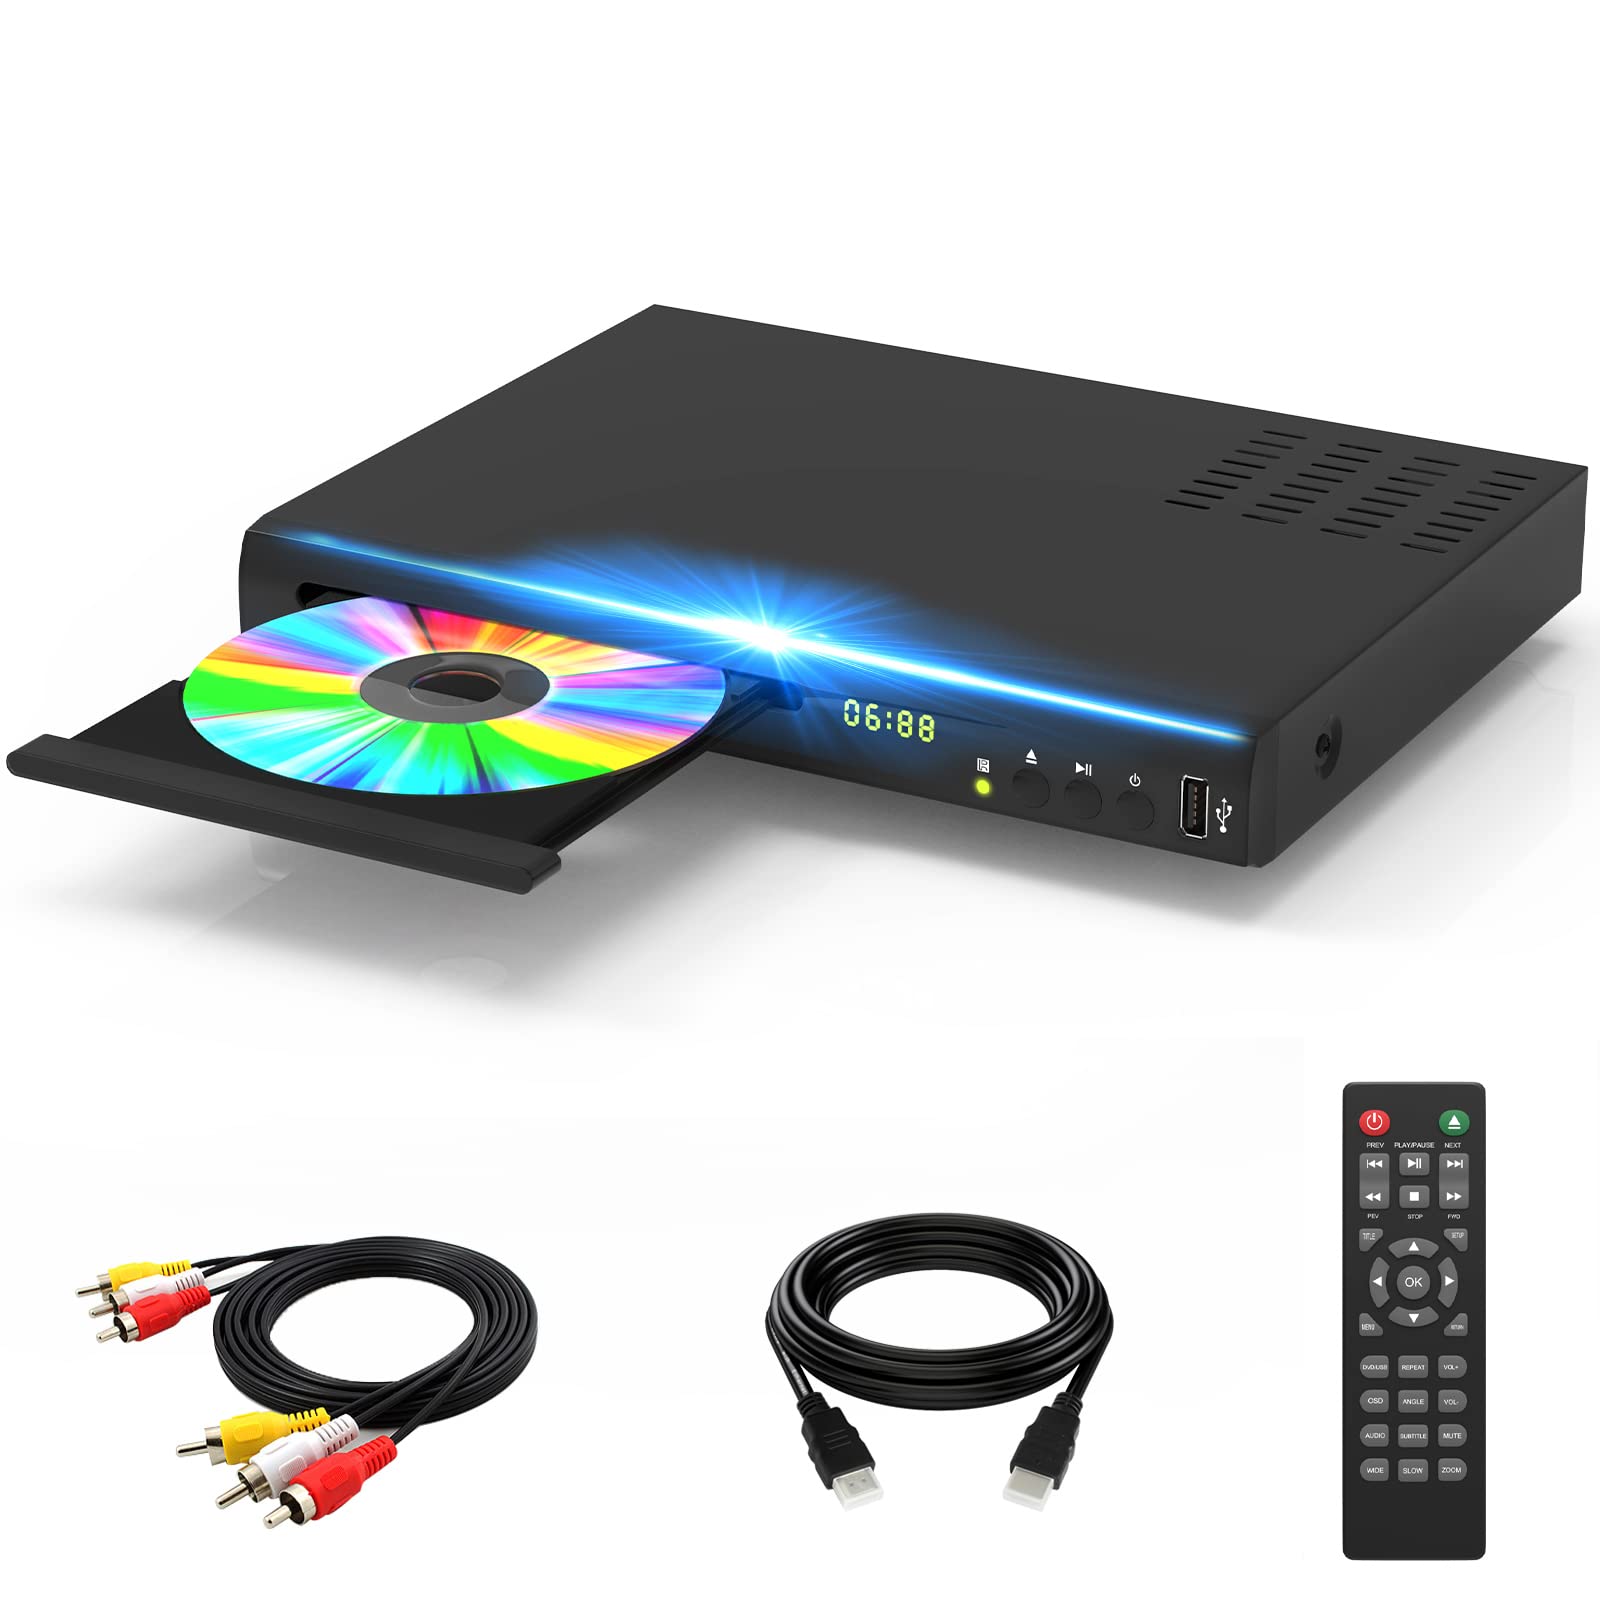 Blu Ray DVD Player, 1080P Home Theater Disc System, Play All DVDs and Region A 1 Blu-Rays, Support Max 128G USB Flash Drive + HDMI/AV/Coaxial Output + Built-in PAL/NTSC with HDMI/AV Cable